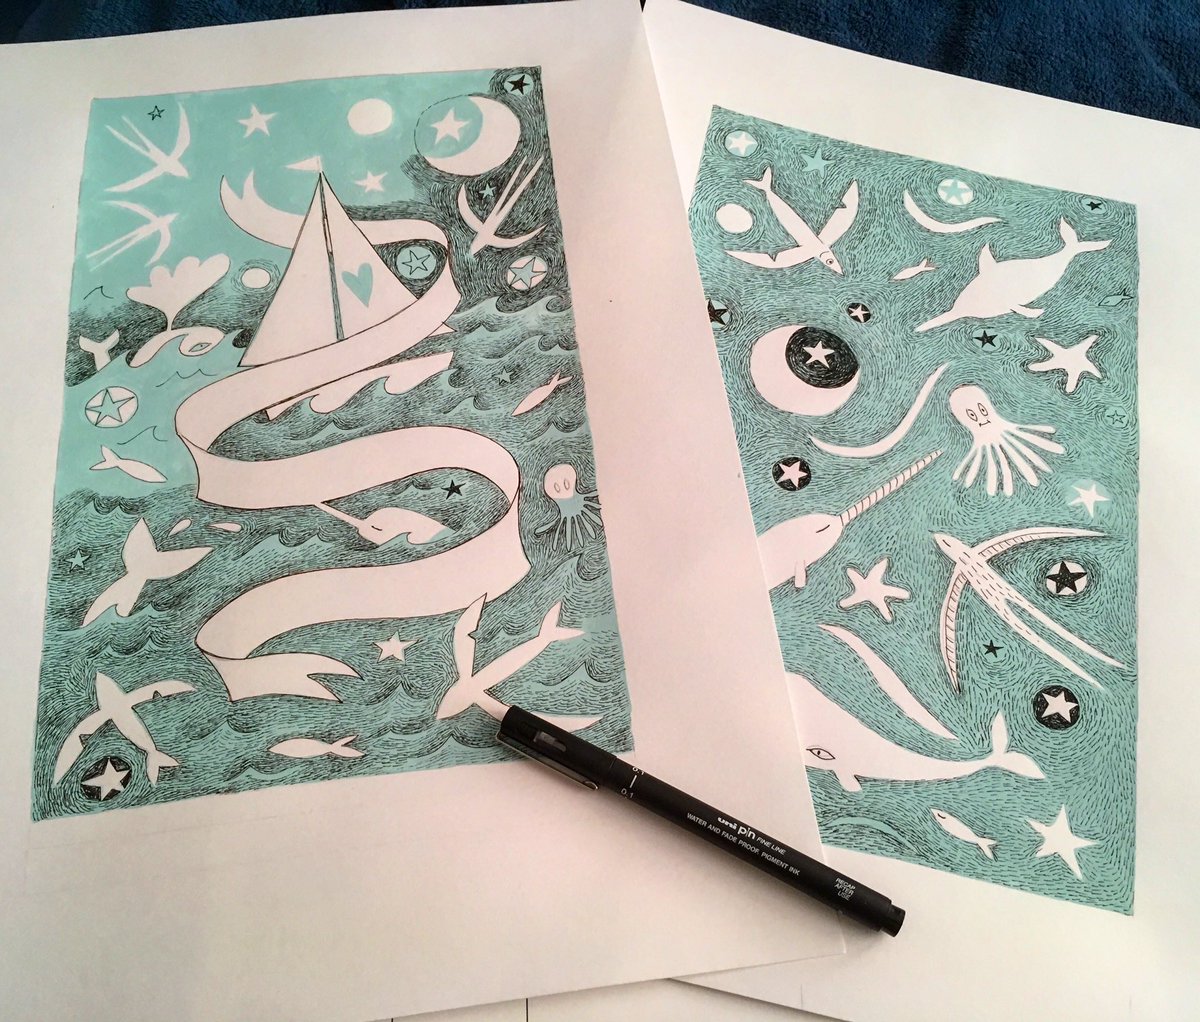 Latest progress on my first two tea towel designs. Finished soon and then off to the printers! #ukgifthour #ukgifthouram #illustratedhomewares #teatowels #makinglifeillustrated #